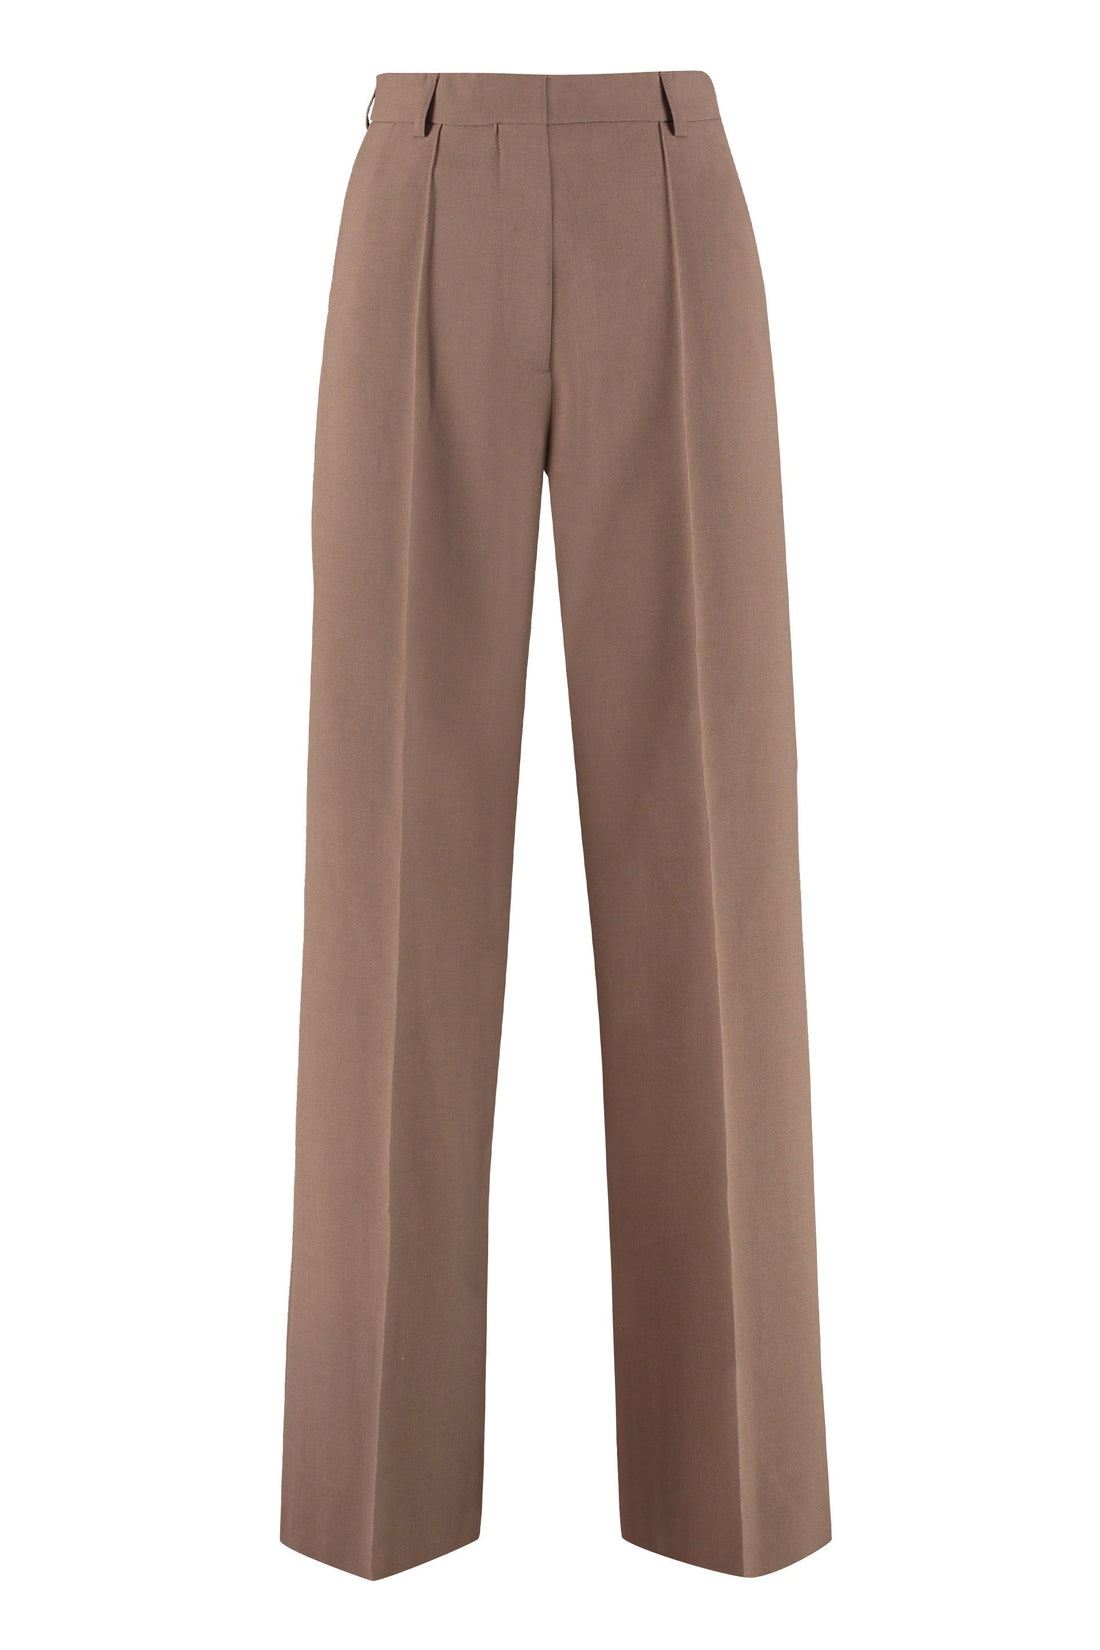 Nanushka-OUTLET-SALE-Cleo tailored wide-leg trousers-ARCHIVIST